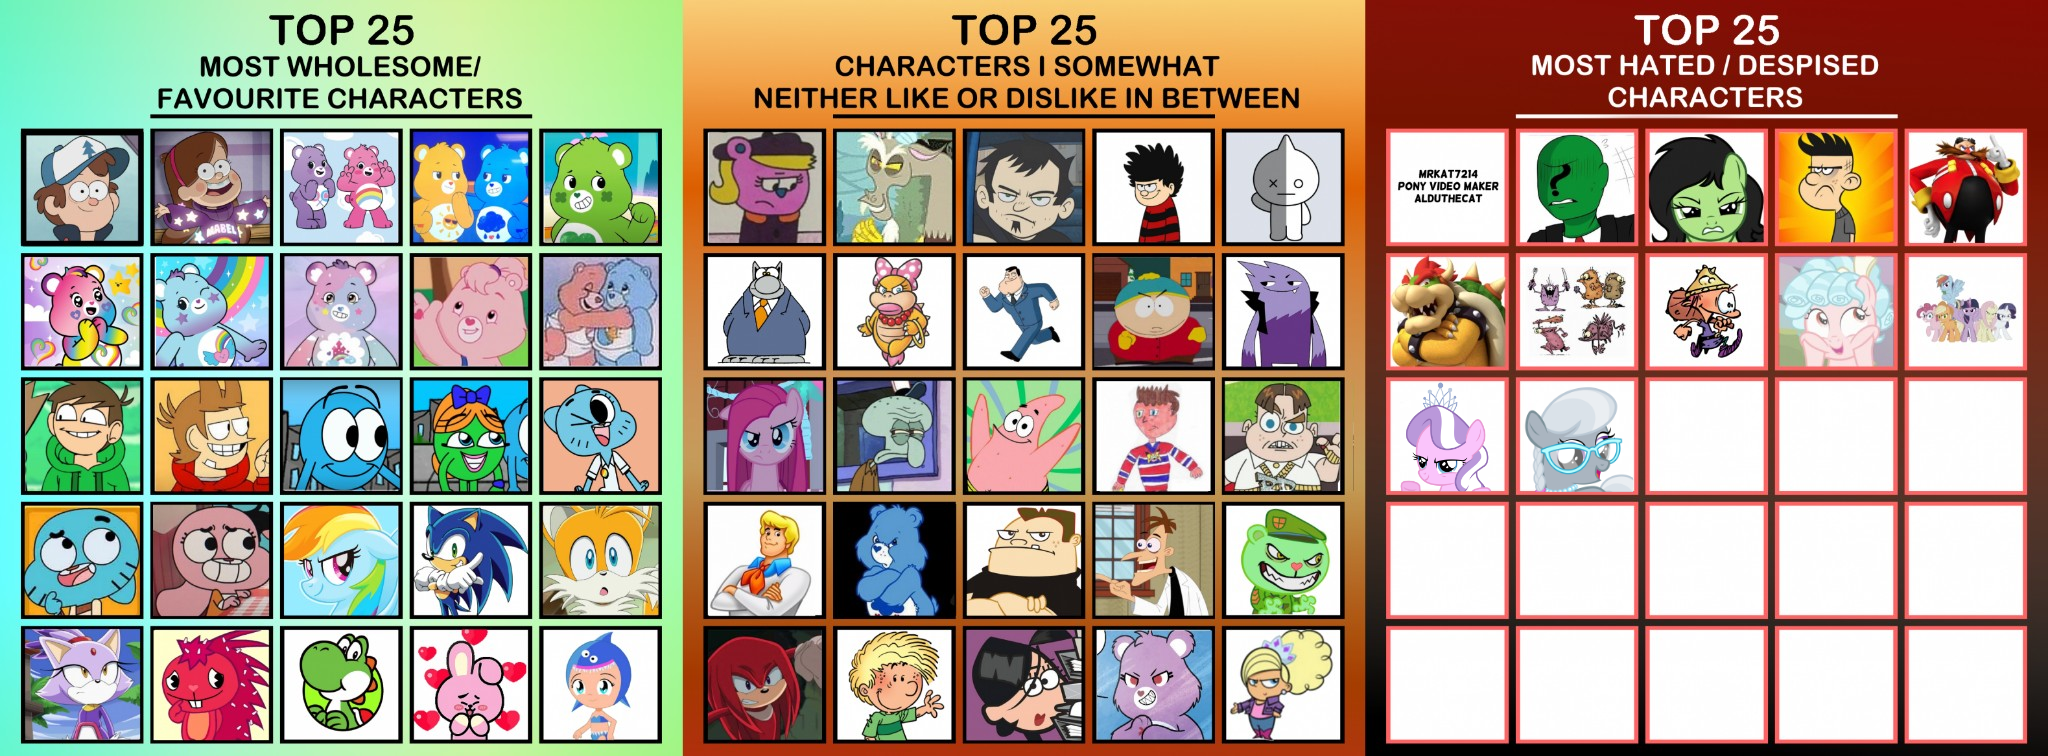 My top 25 favorite characters in order from left to right : r